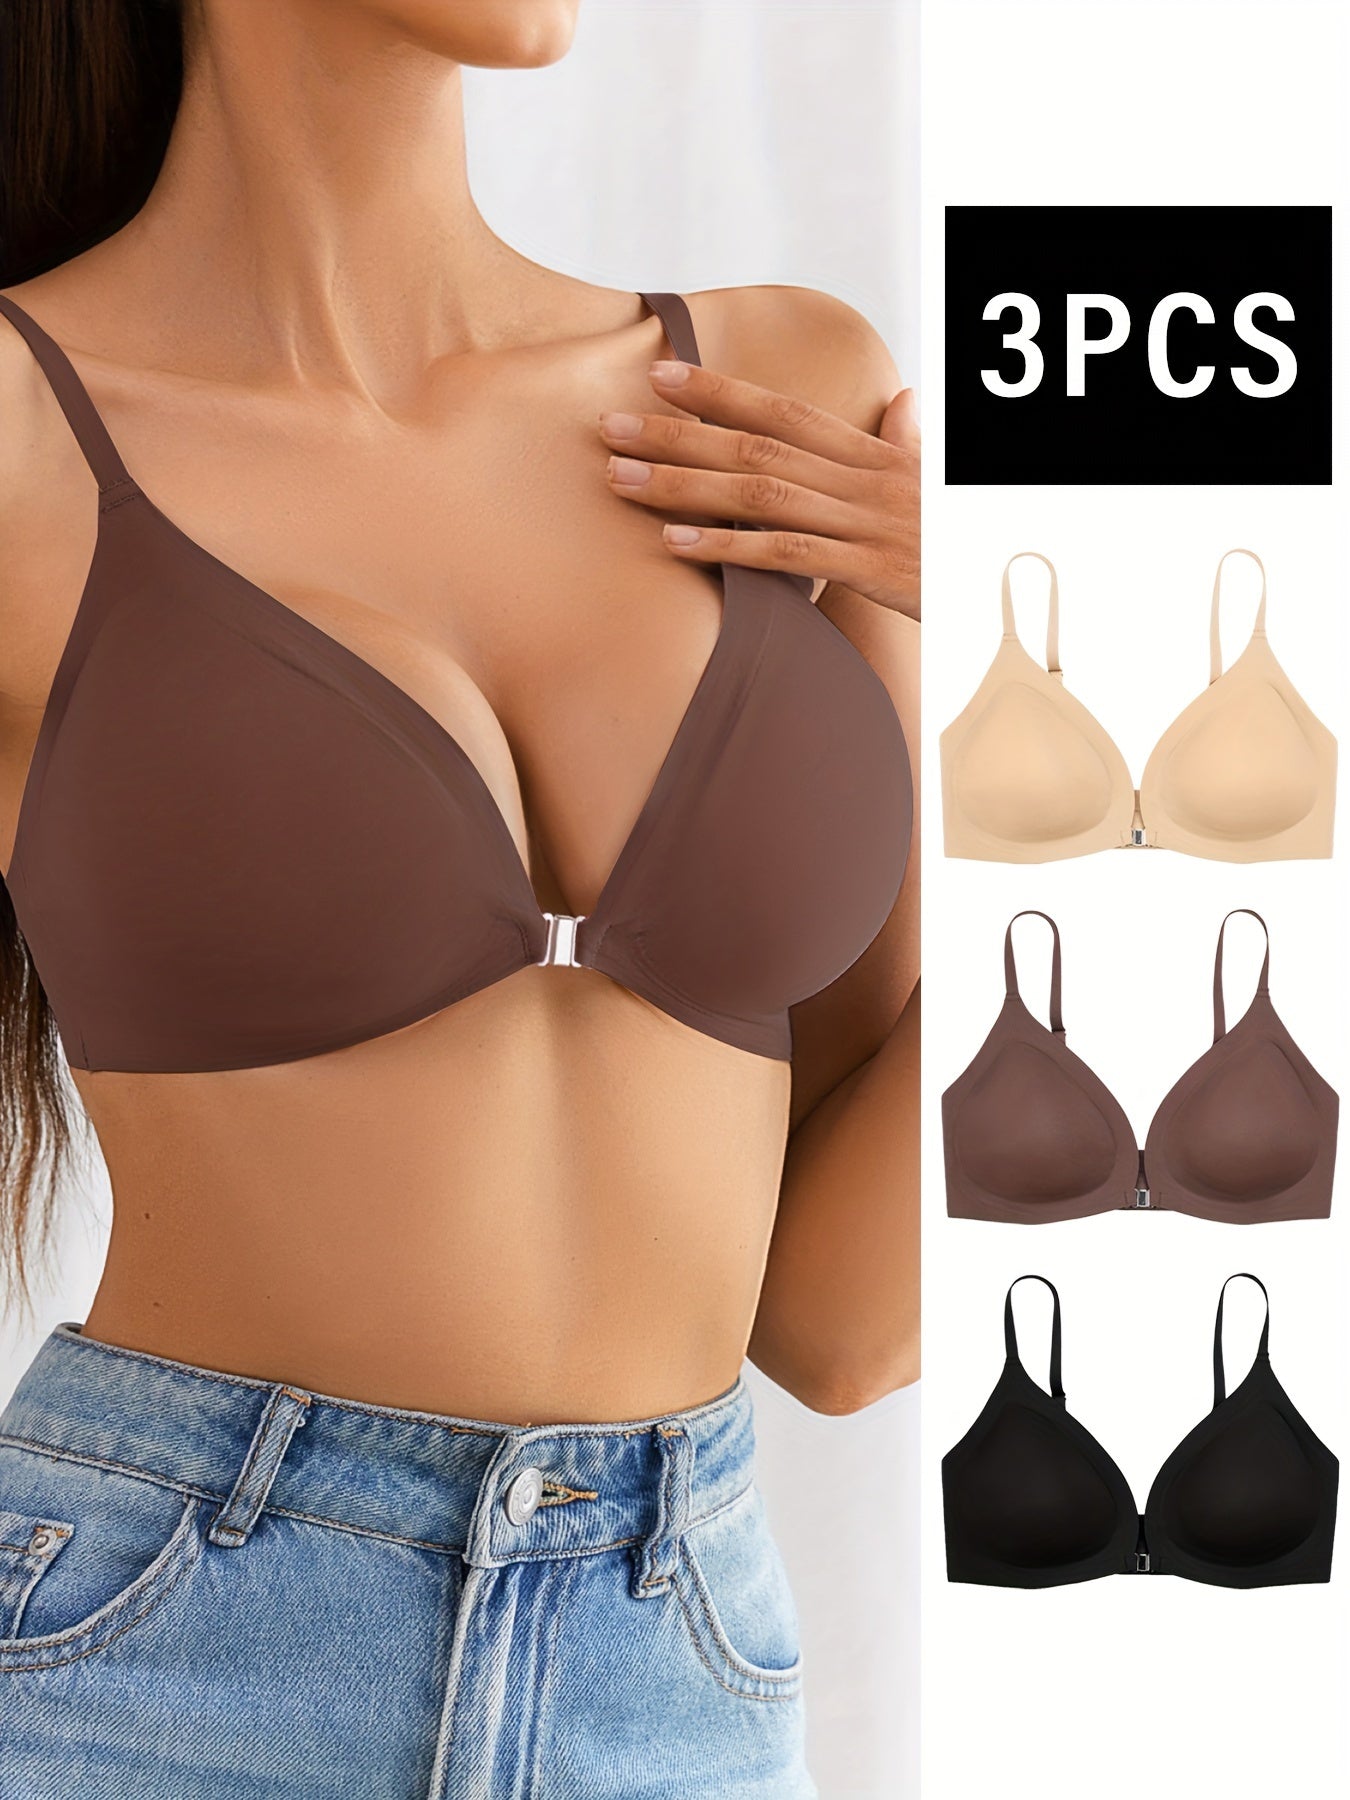 3pcs Seamless Solid Wireless Bras, Comfy & Breathable Front Buckle Push Up Bra, Women's Lingerie & Underwear